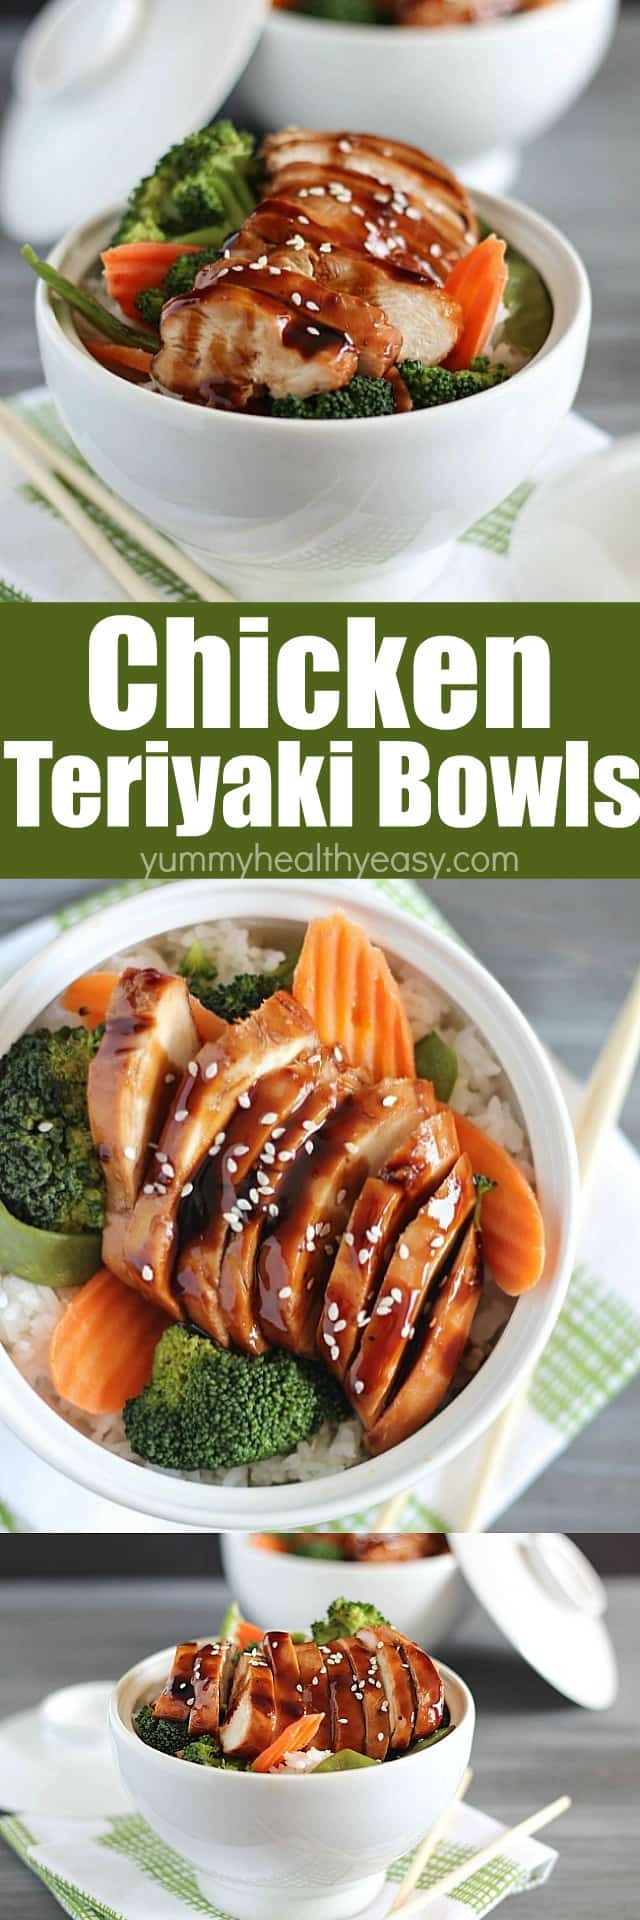 Delicious Chicken Teriyaki Bowls with chicken baked in a homemade teriyaki sauce then layered on top of a bed of rice & veggies! via @jennikolaus